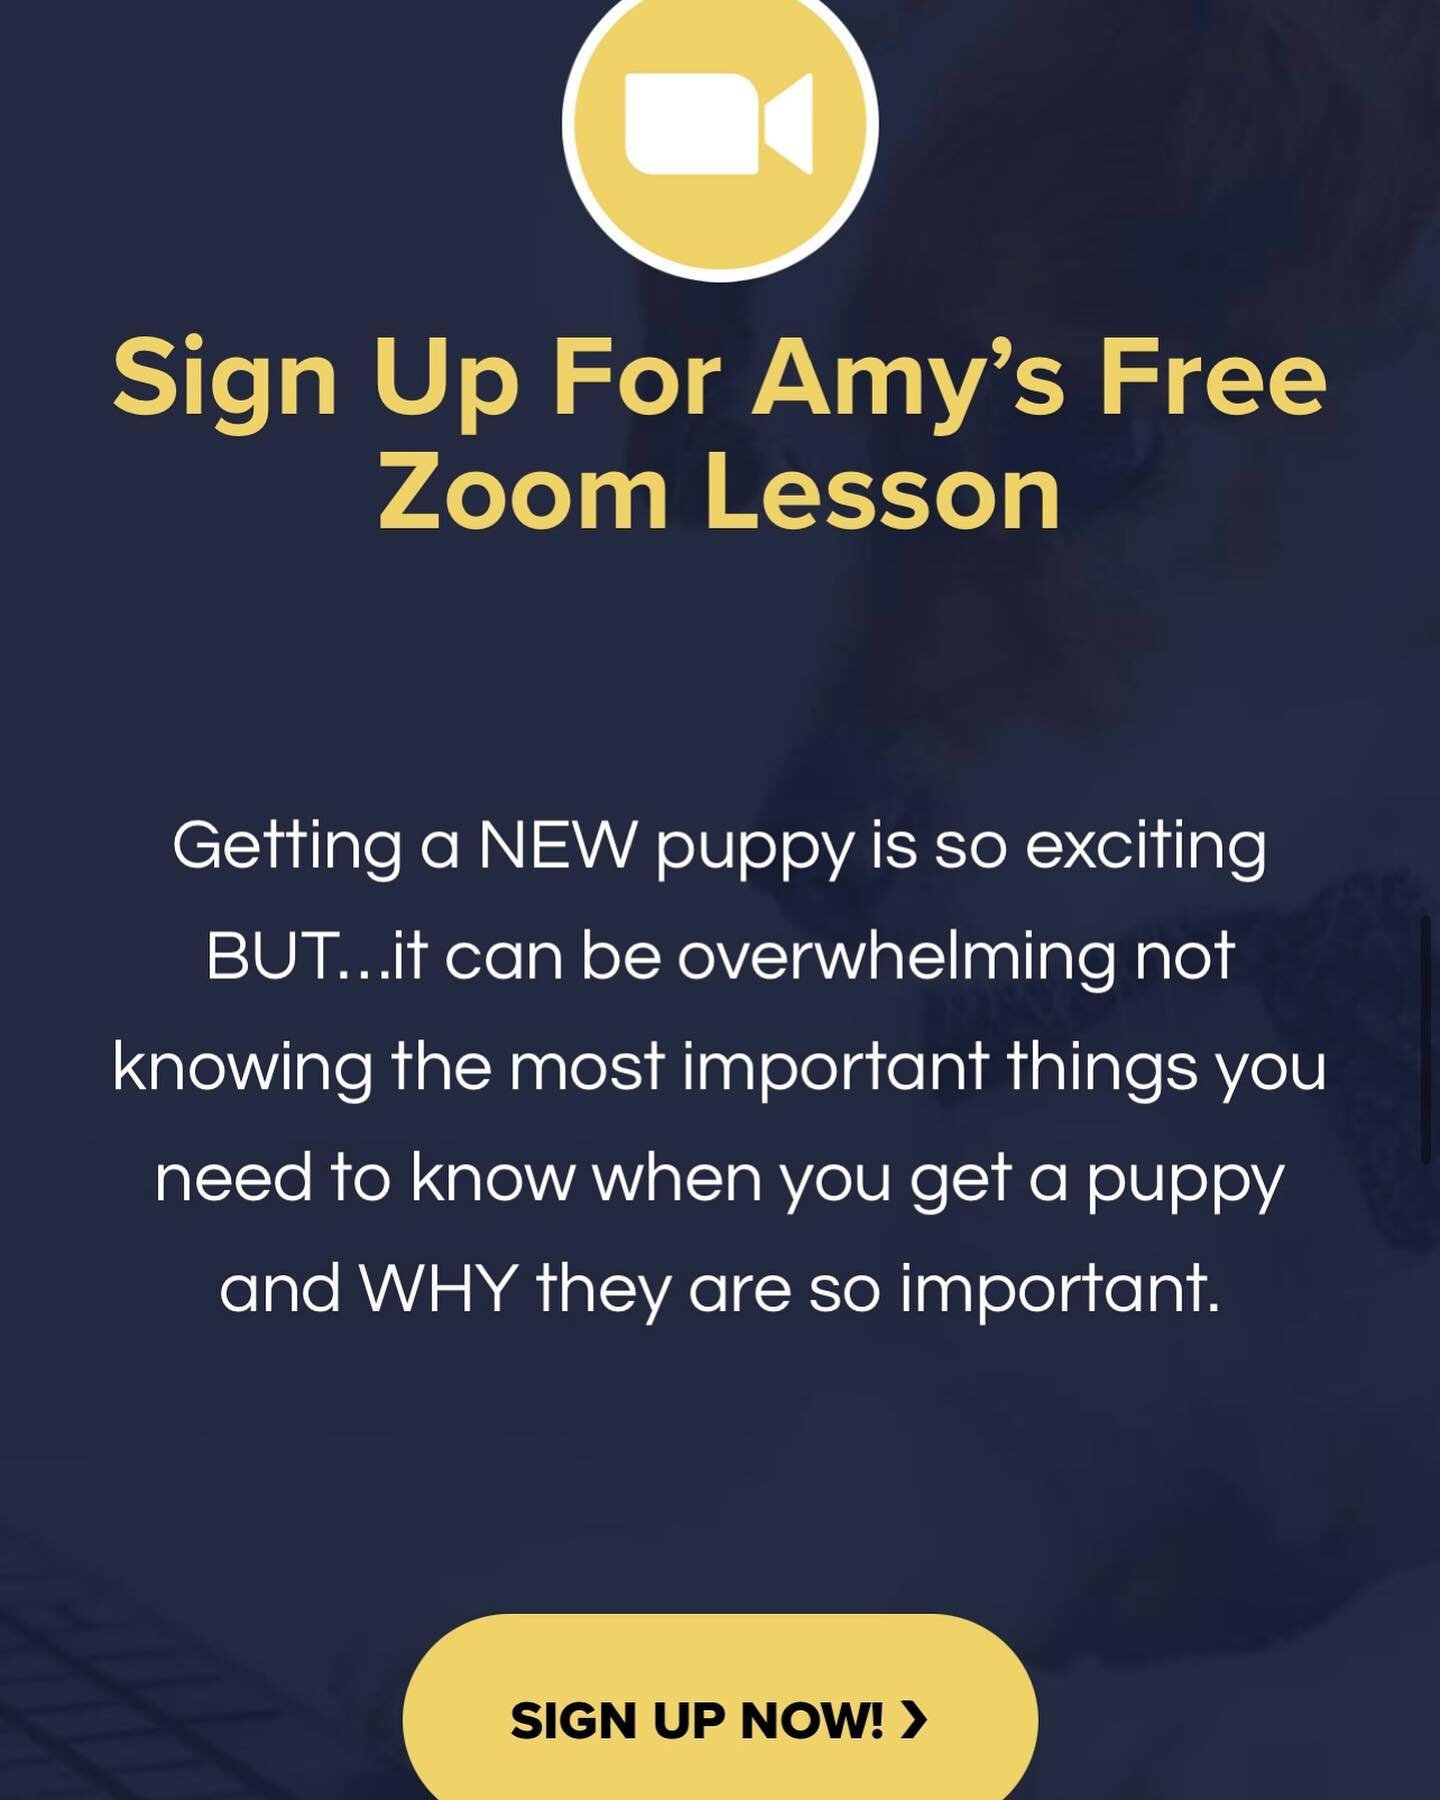 New Puppy 🐶 need some help? My Free Zoom lesson on puppy set up is here!! Sign up (Link in my Bio on Instagram) or click below on FB ⬇️ 

https://www.amysprepuppyschool.com/free-live-zoom-lesson-with-amy-july